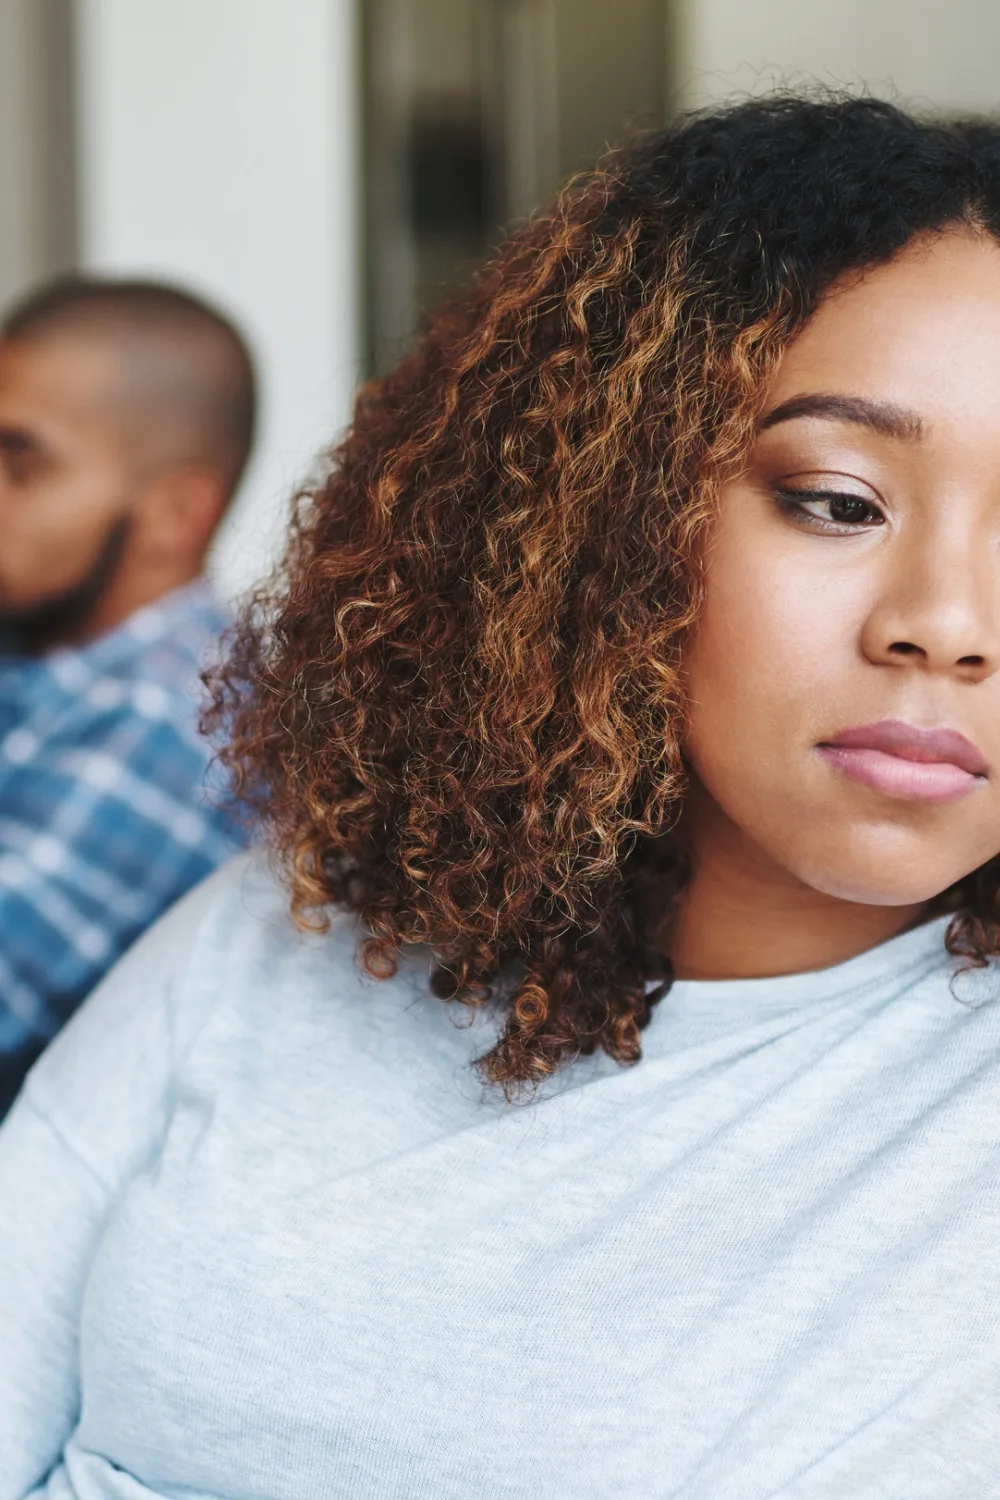 6 Eye-opening Reasons Why Husbands Treat Their Wives Badly